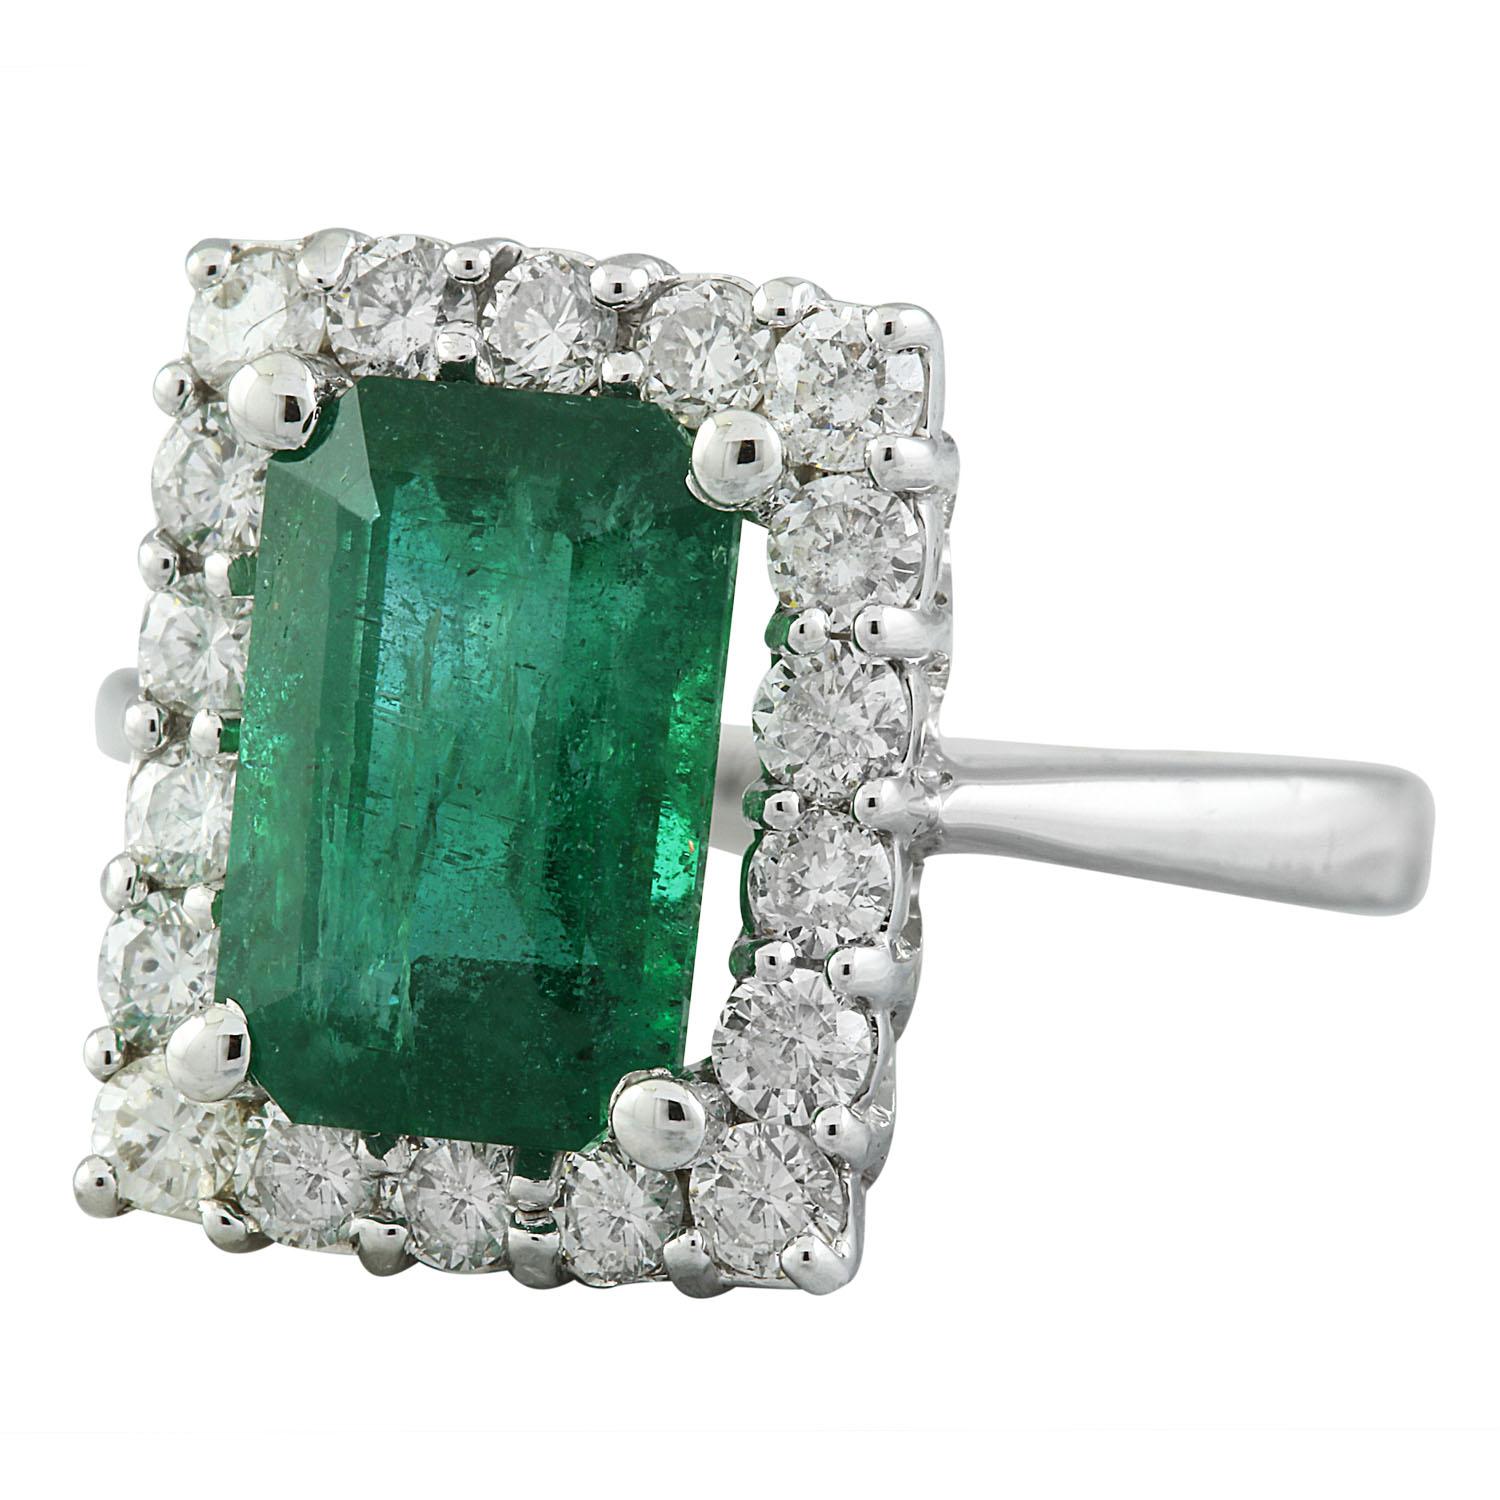 Introducing our exquisite 14 Karat Solid White Gold Diamond Ring, showcasing a stunning 4.22 Carat Natural Emerald, stamped for authenticity. Weighing 5.3 grams in total, this ring exudes elegance and sophistication. The captivating Emerald weighs